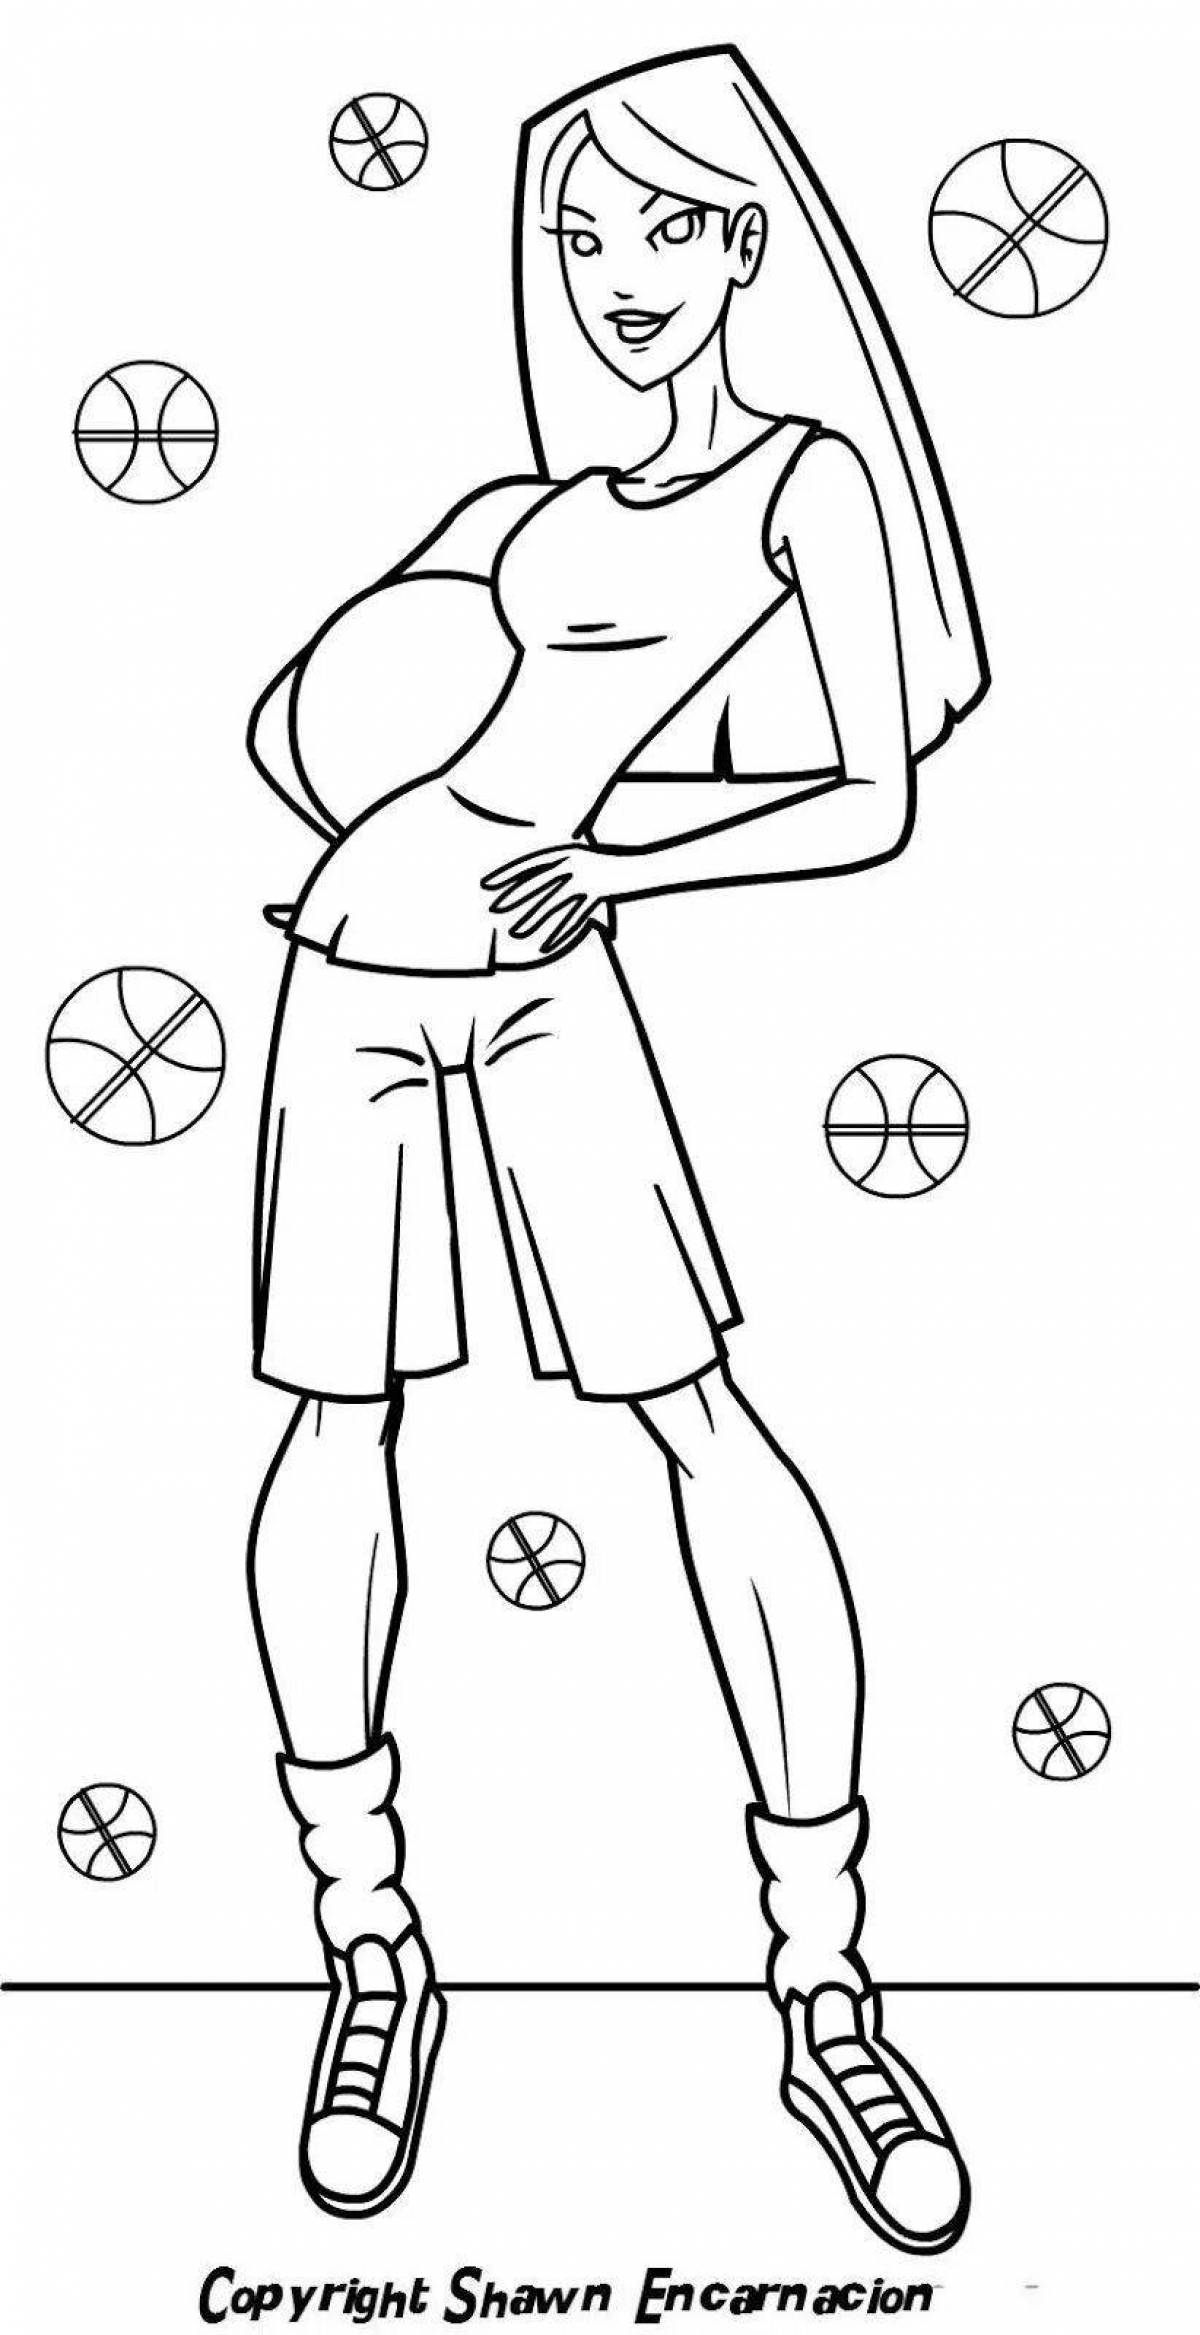 Cute coach coloring page